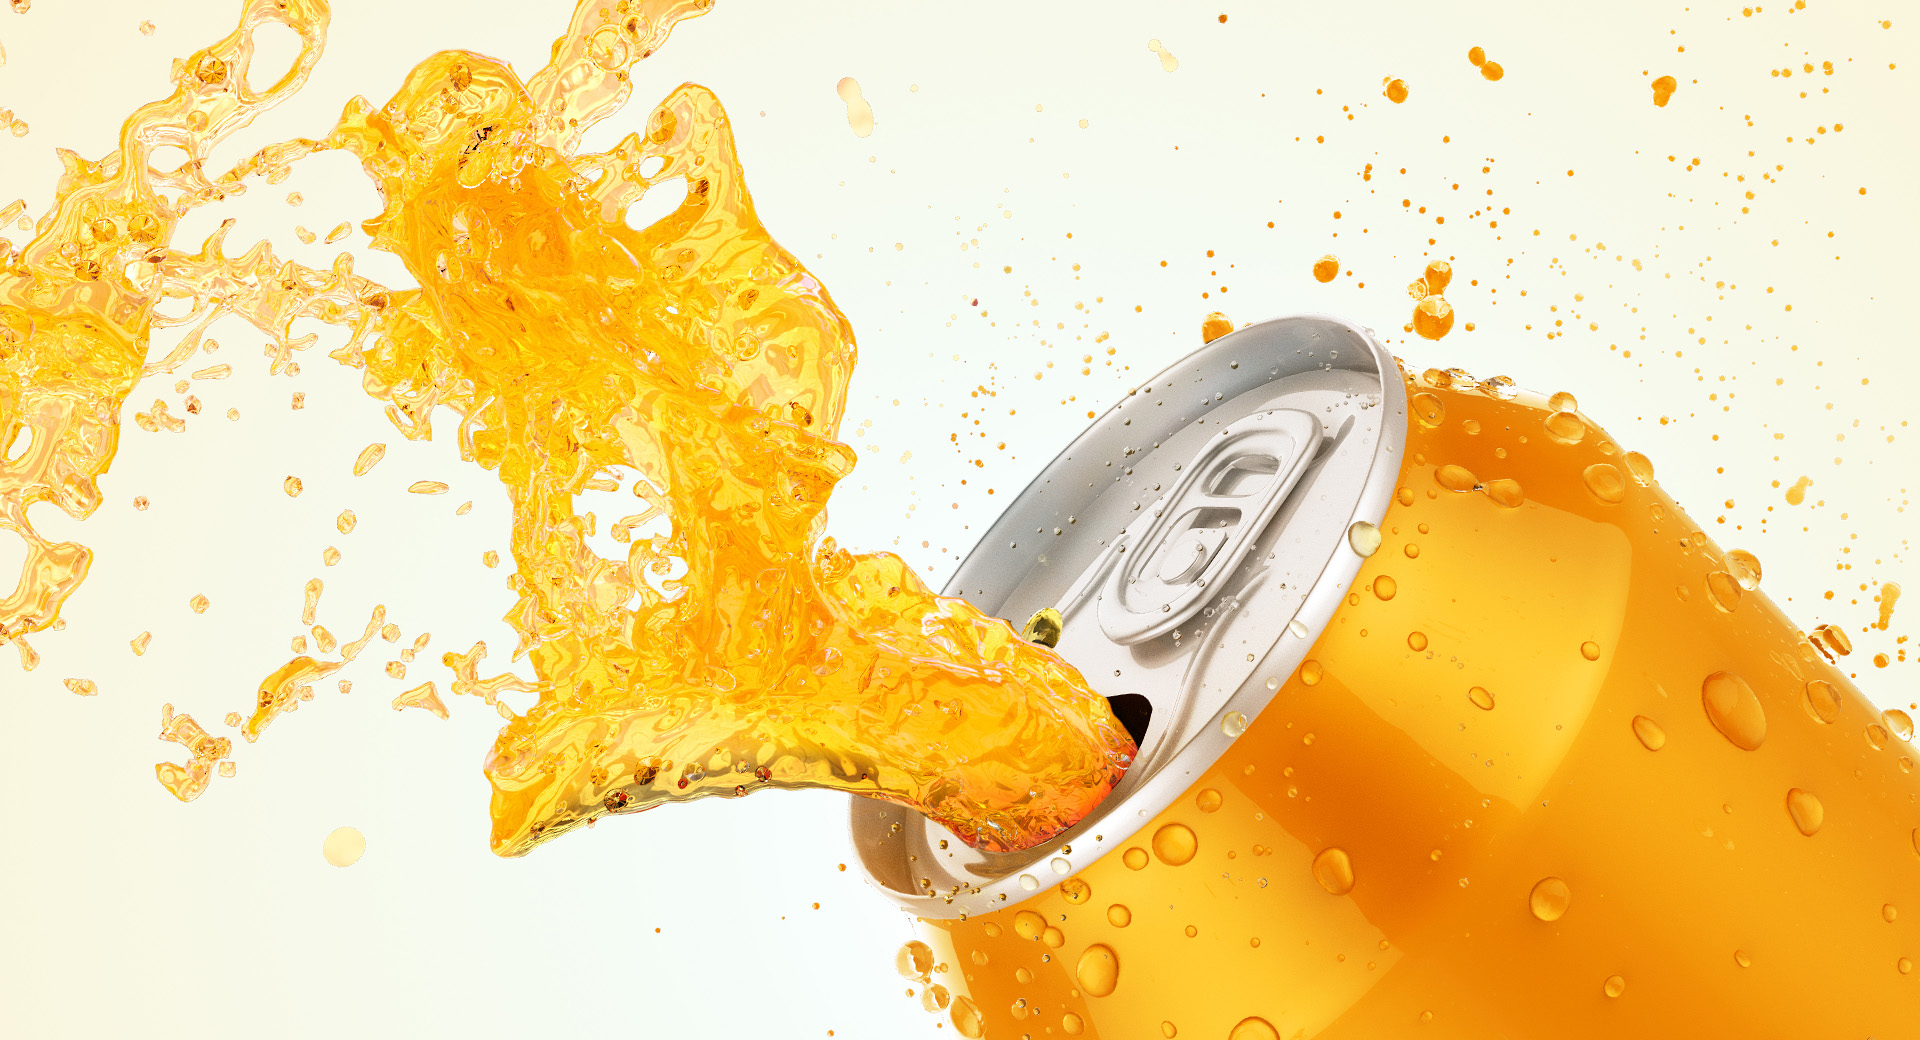 Orange beverage can pouring to the left with soda flying out of the can.